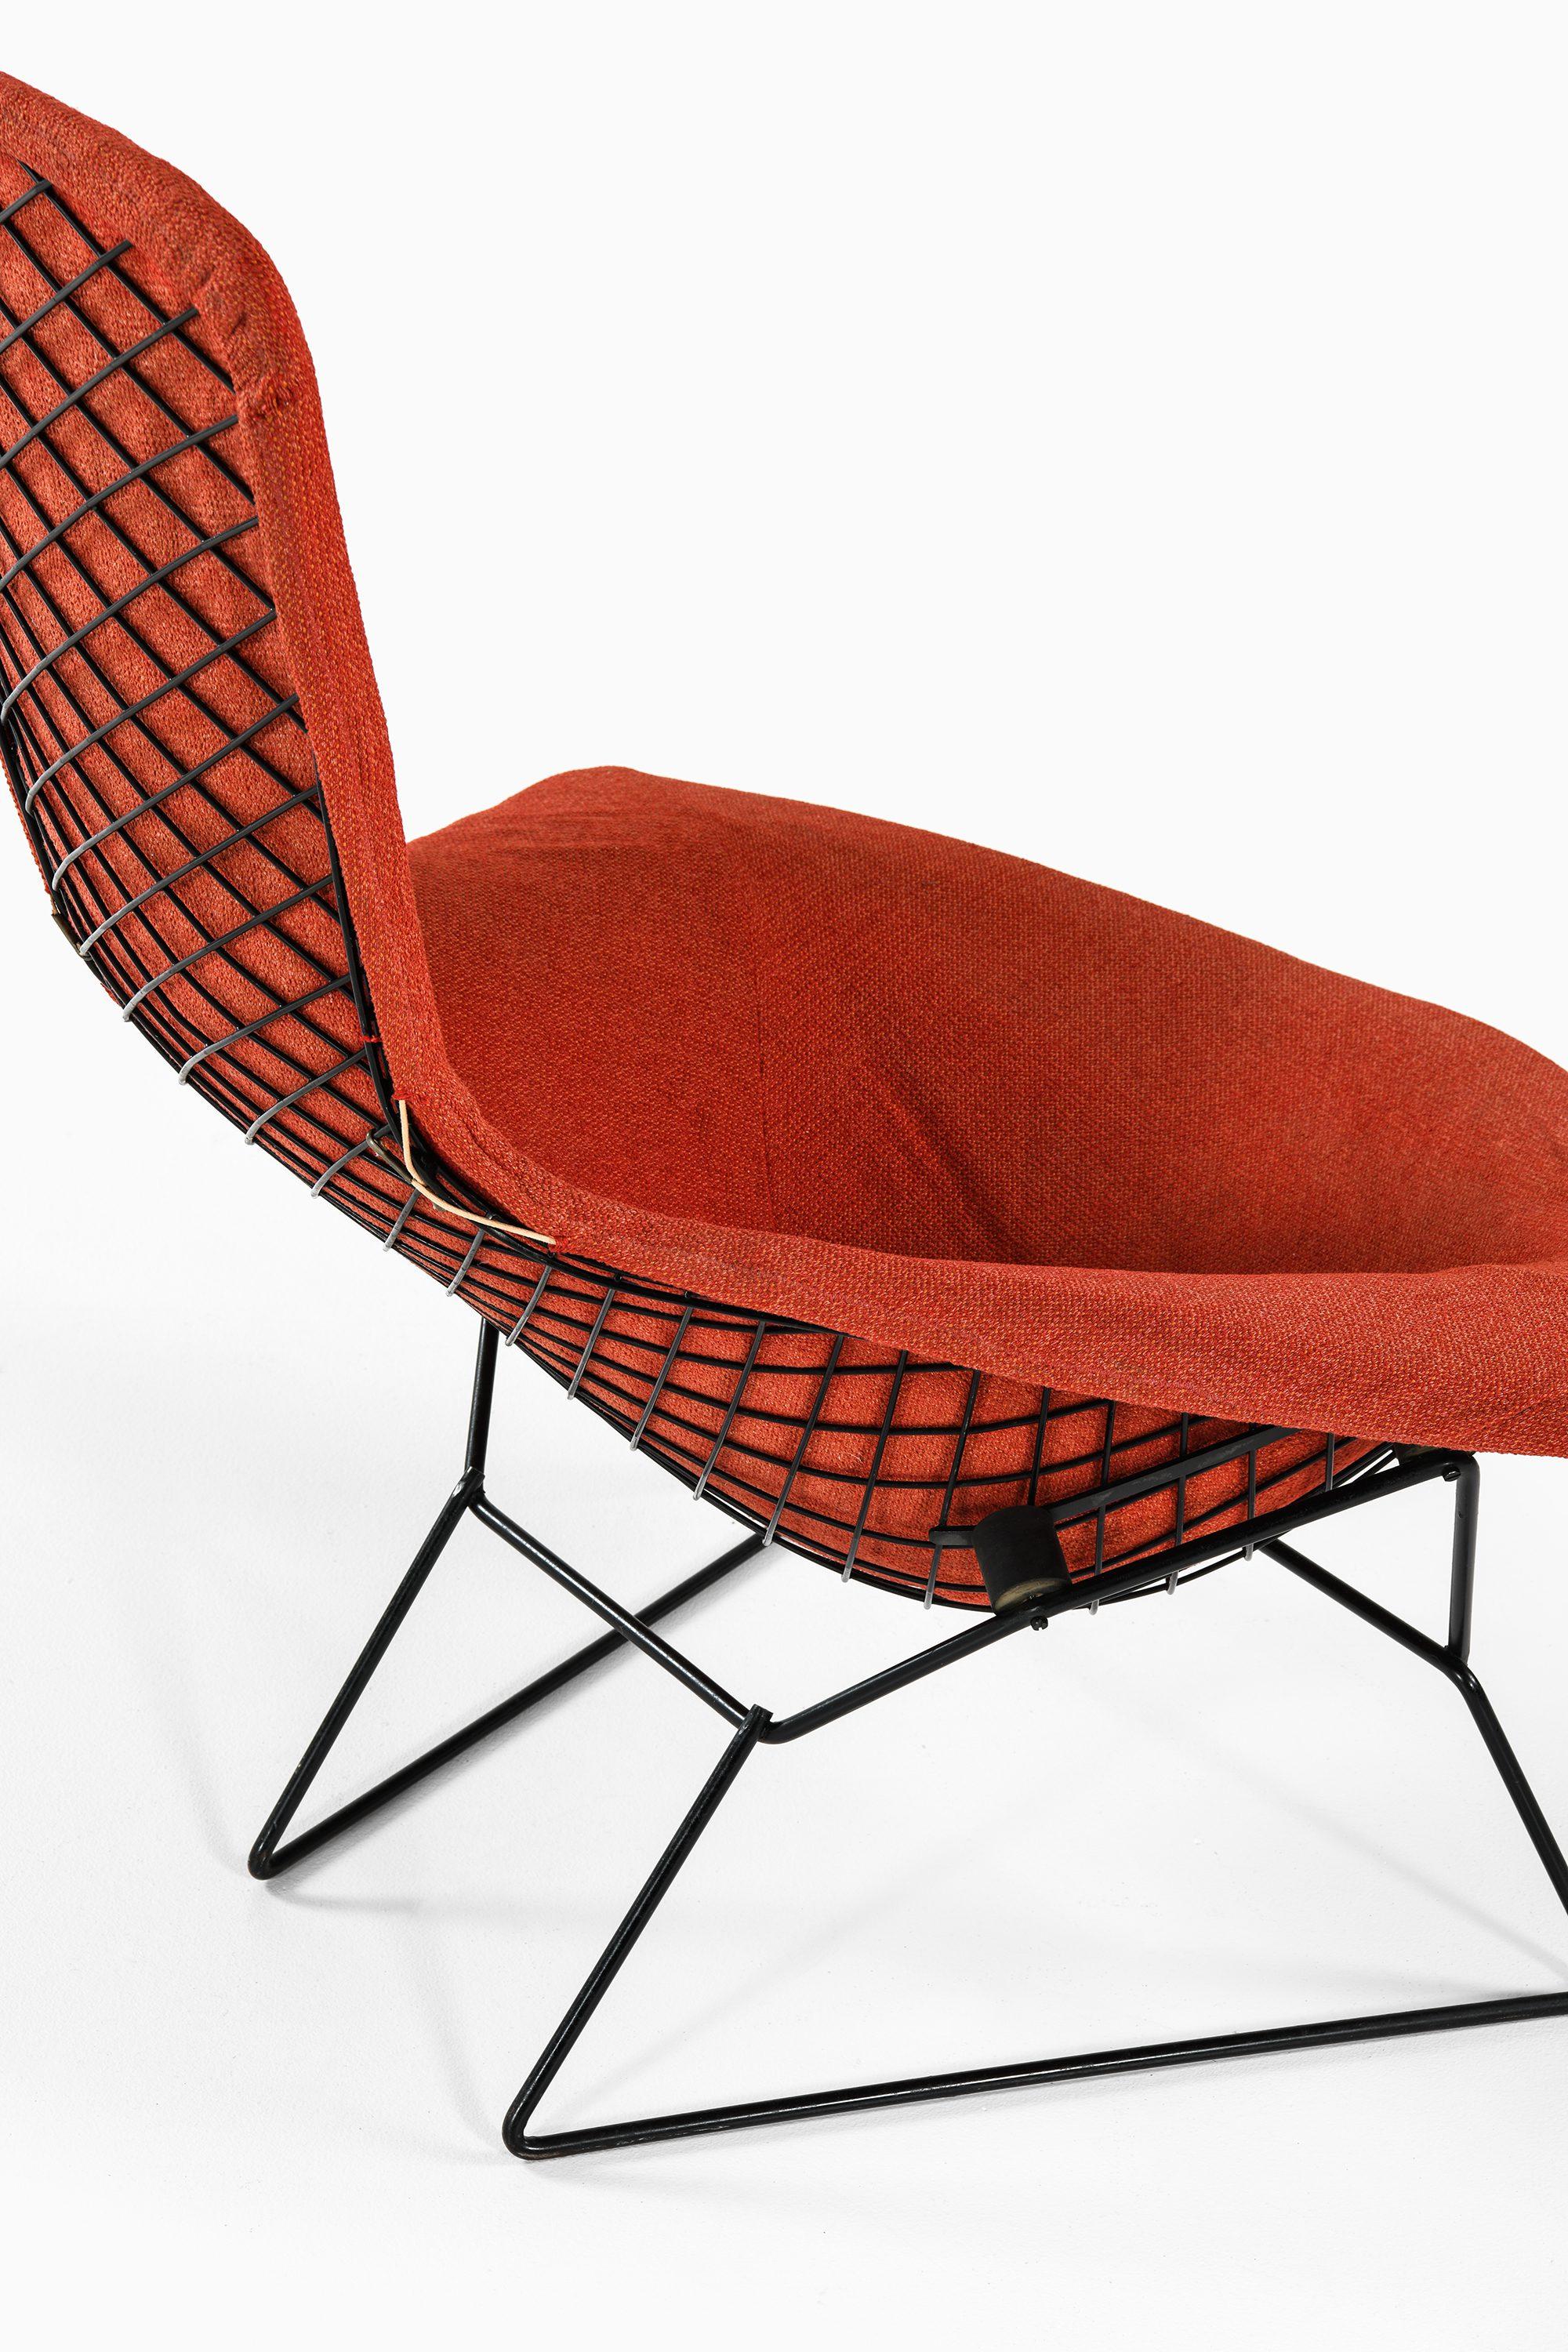 Easy Bird Chair in Black Lacquered Metal and Red Fabric by Harry Bertoia, 1950s For Sale 1